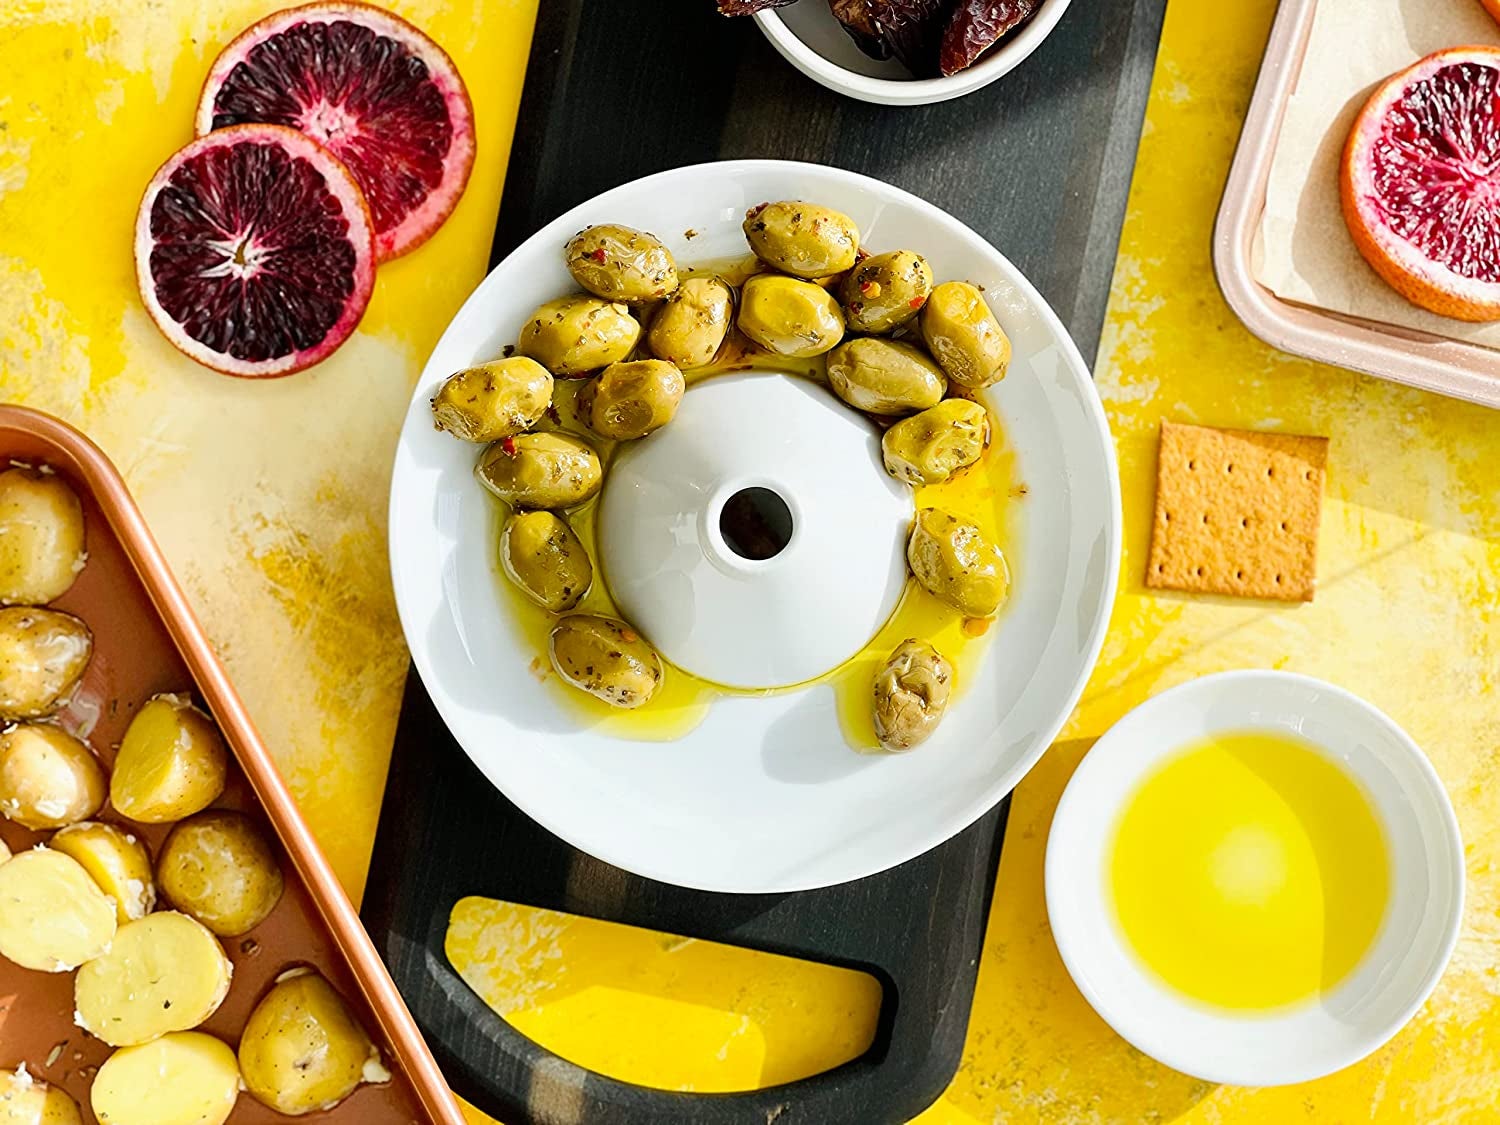 dish with raised center and hole for pits with olives and other foods around it